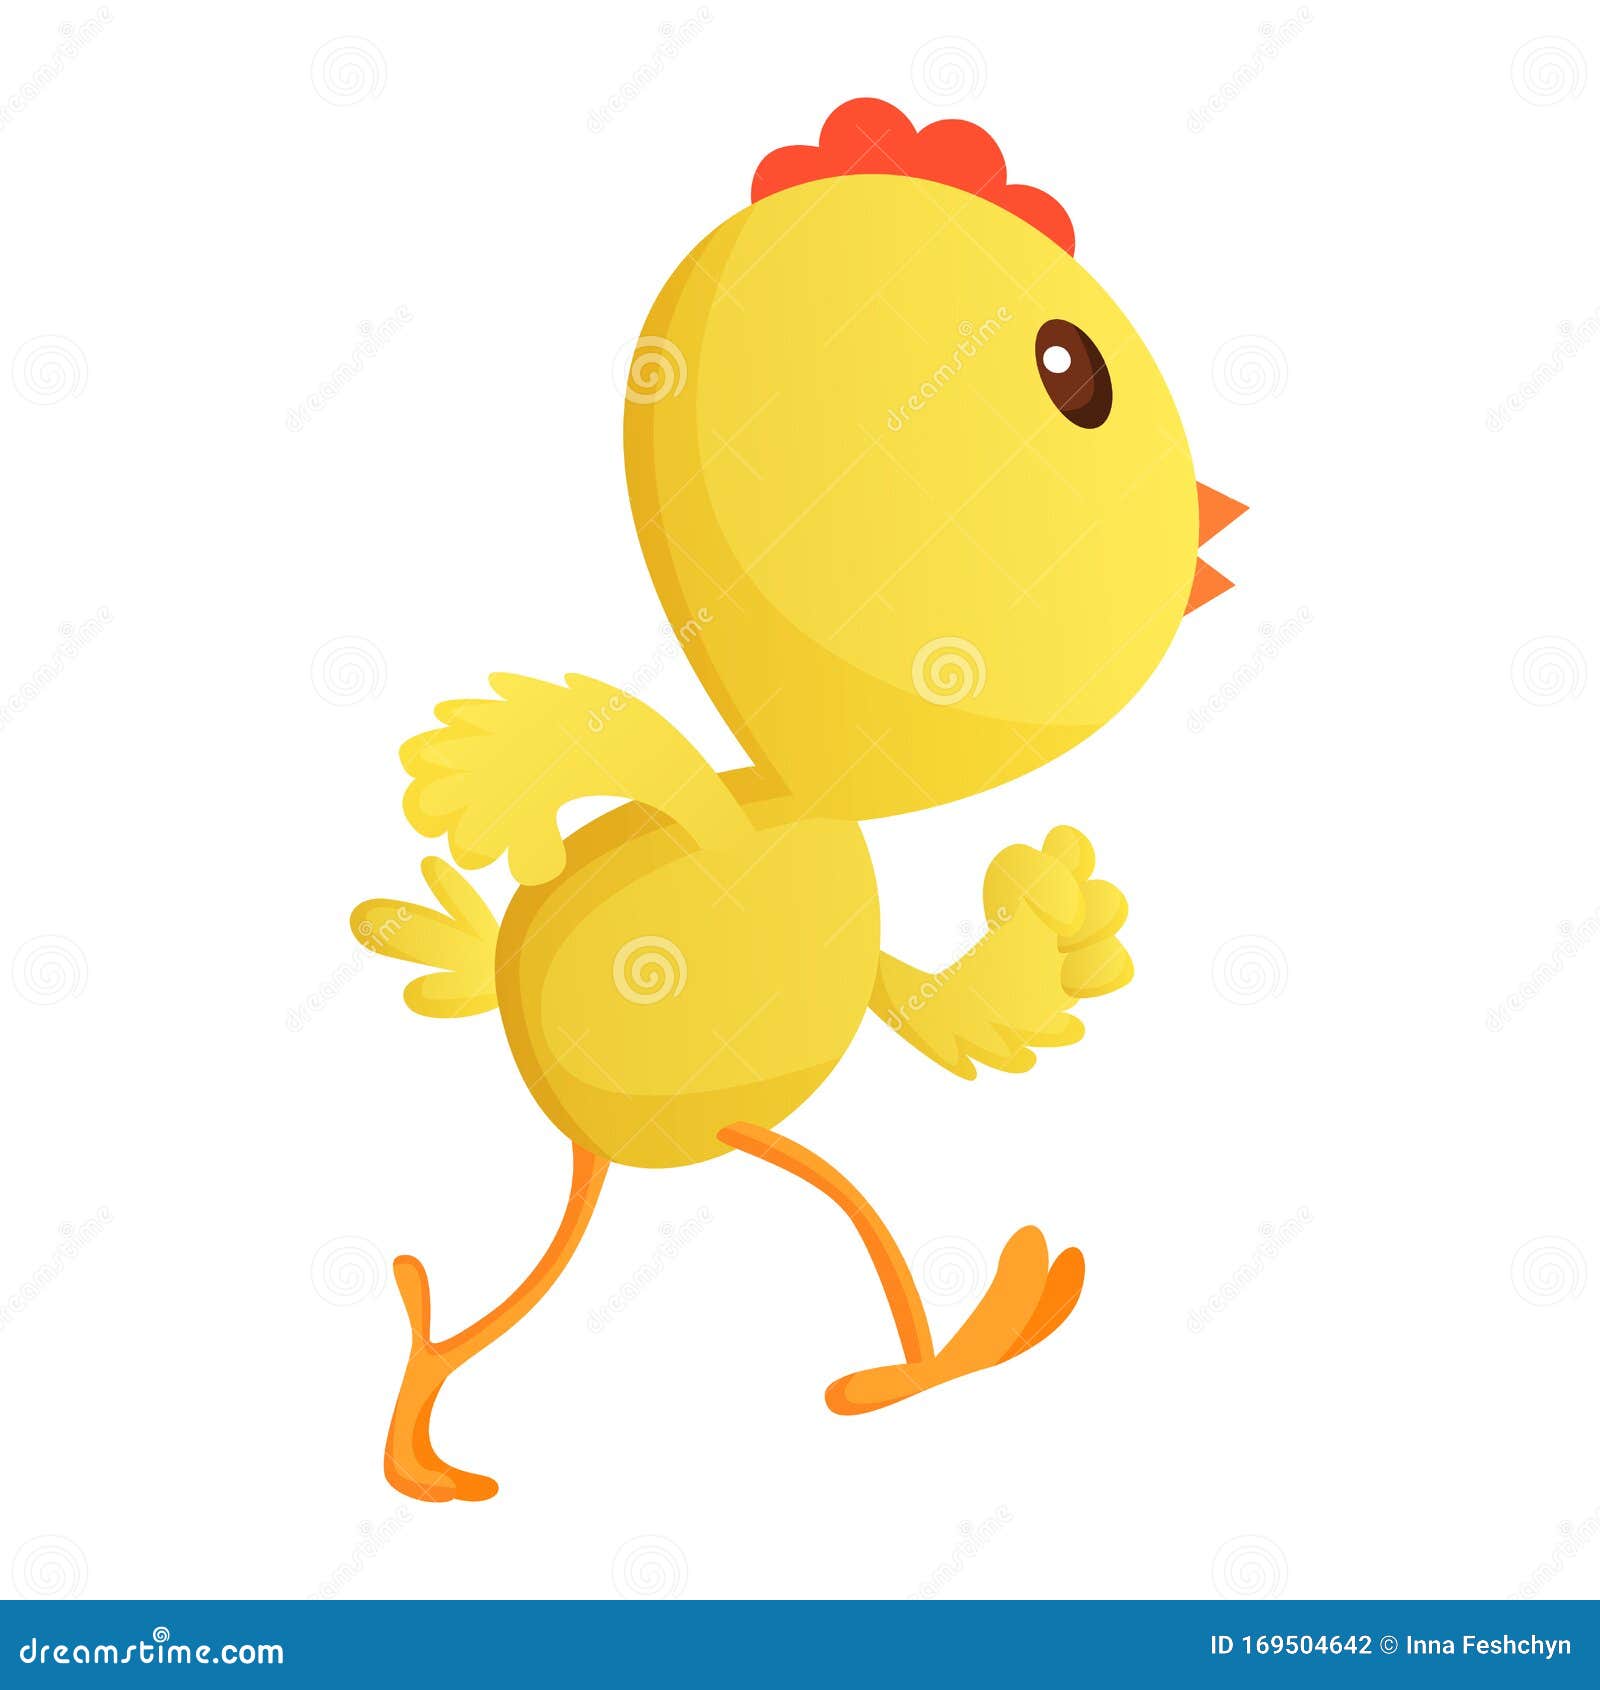 Cute Little Cartoon Chick Running Somewhere Isolated On A White Background Funny Yellow Chicken